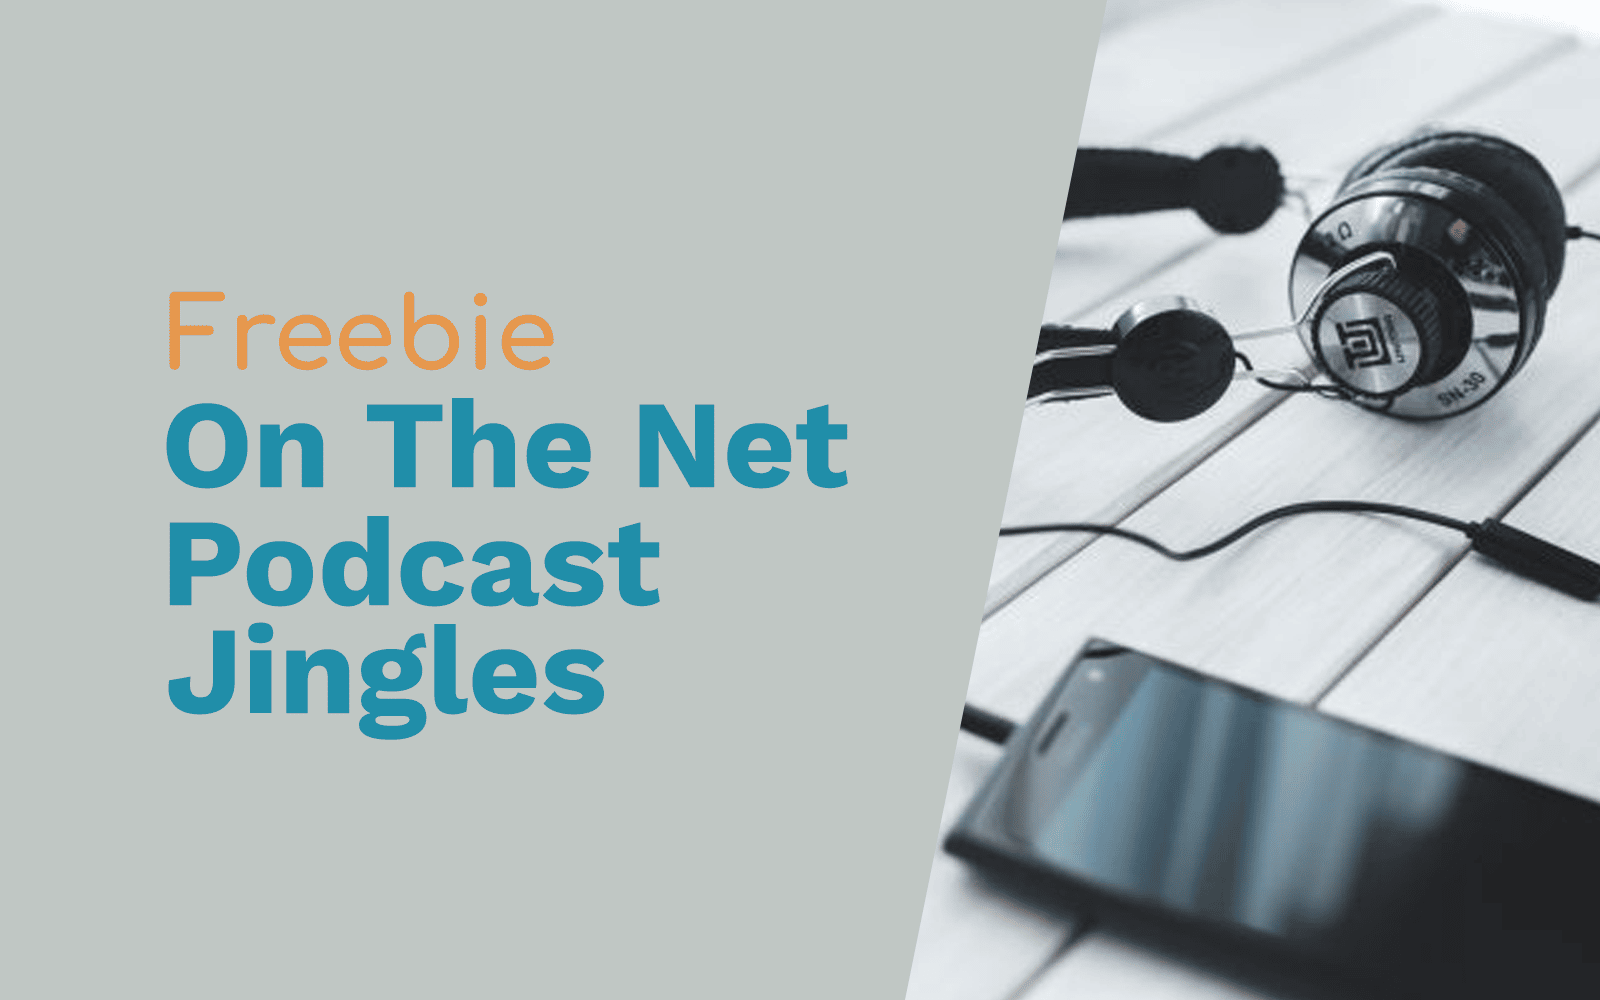 On The Net Podcast Intros Free Jingles podcast intro Music Radio Creative